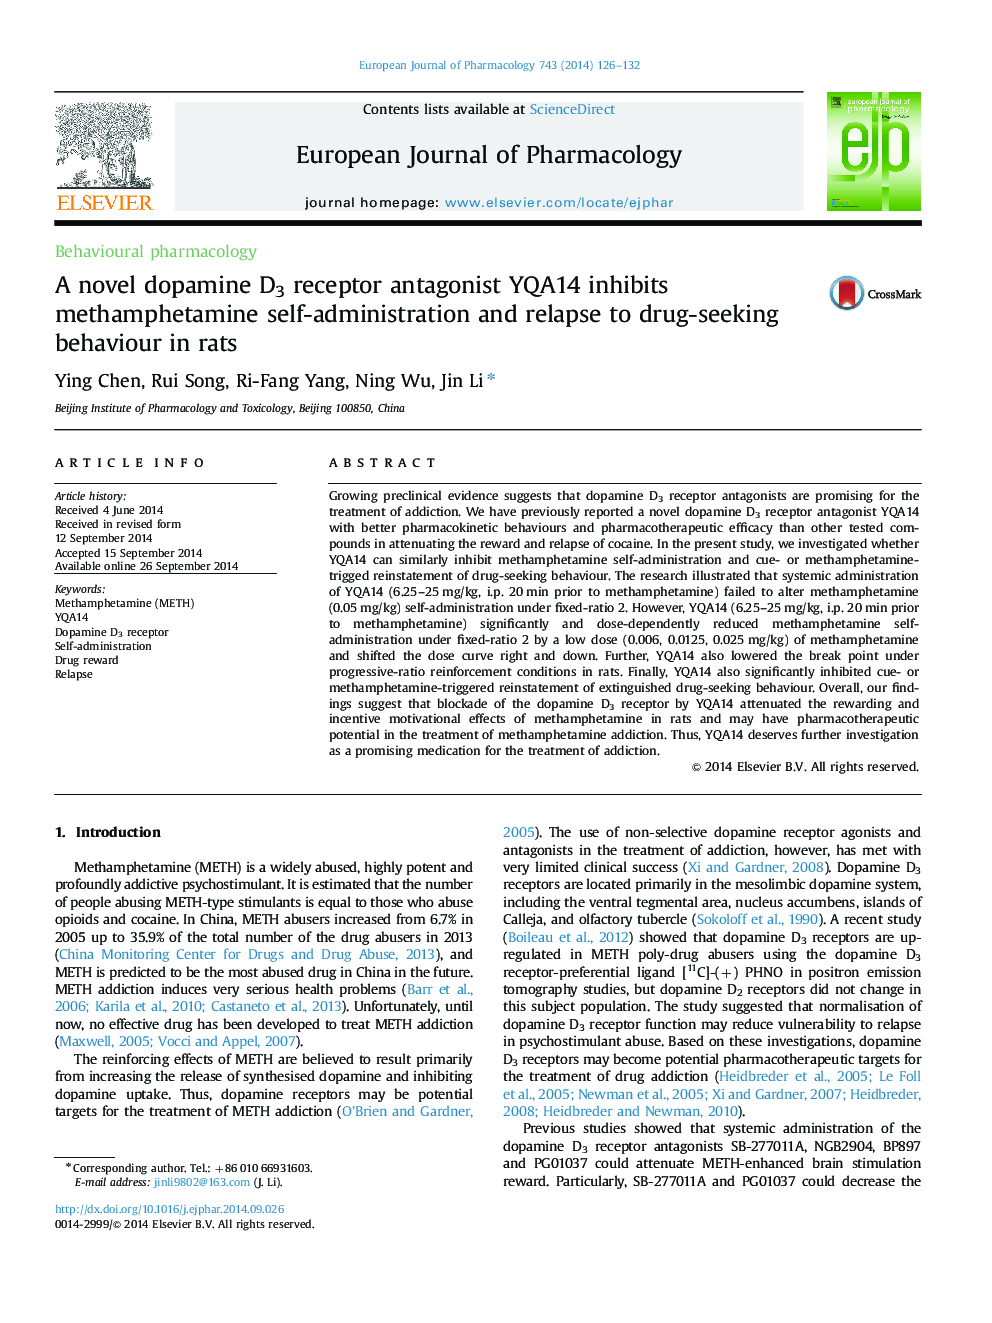 A novel dopamine D3 receptor antagonist YQA14 inhibits methamphetamine self-administration and relapse to drug-seeking behaviour in rats